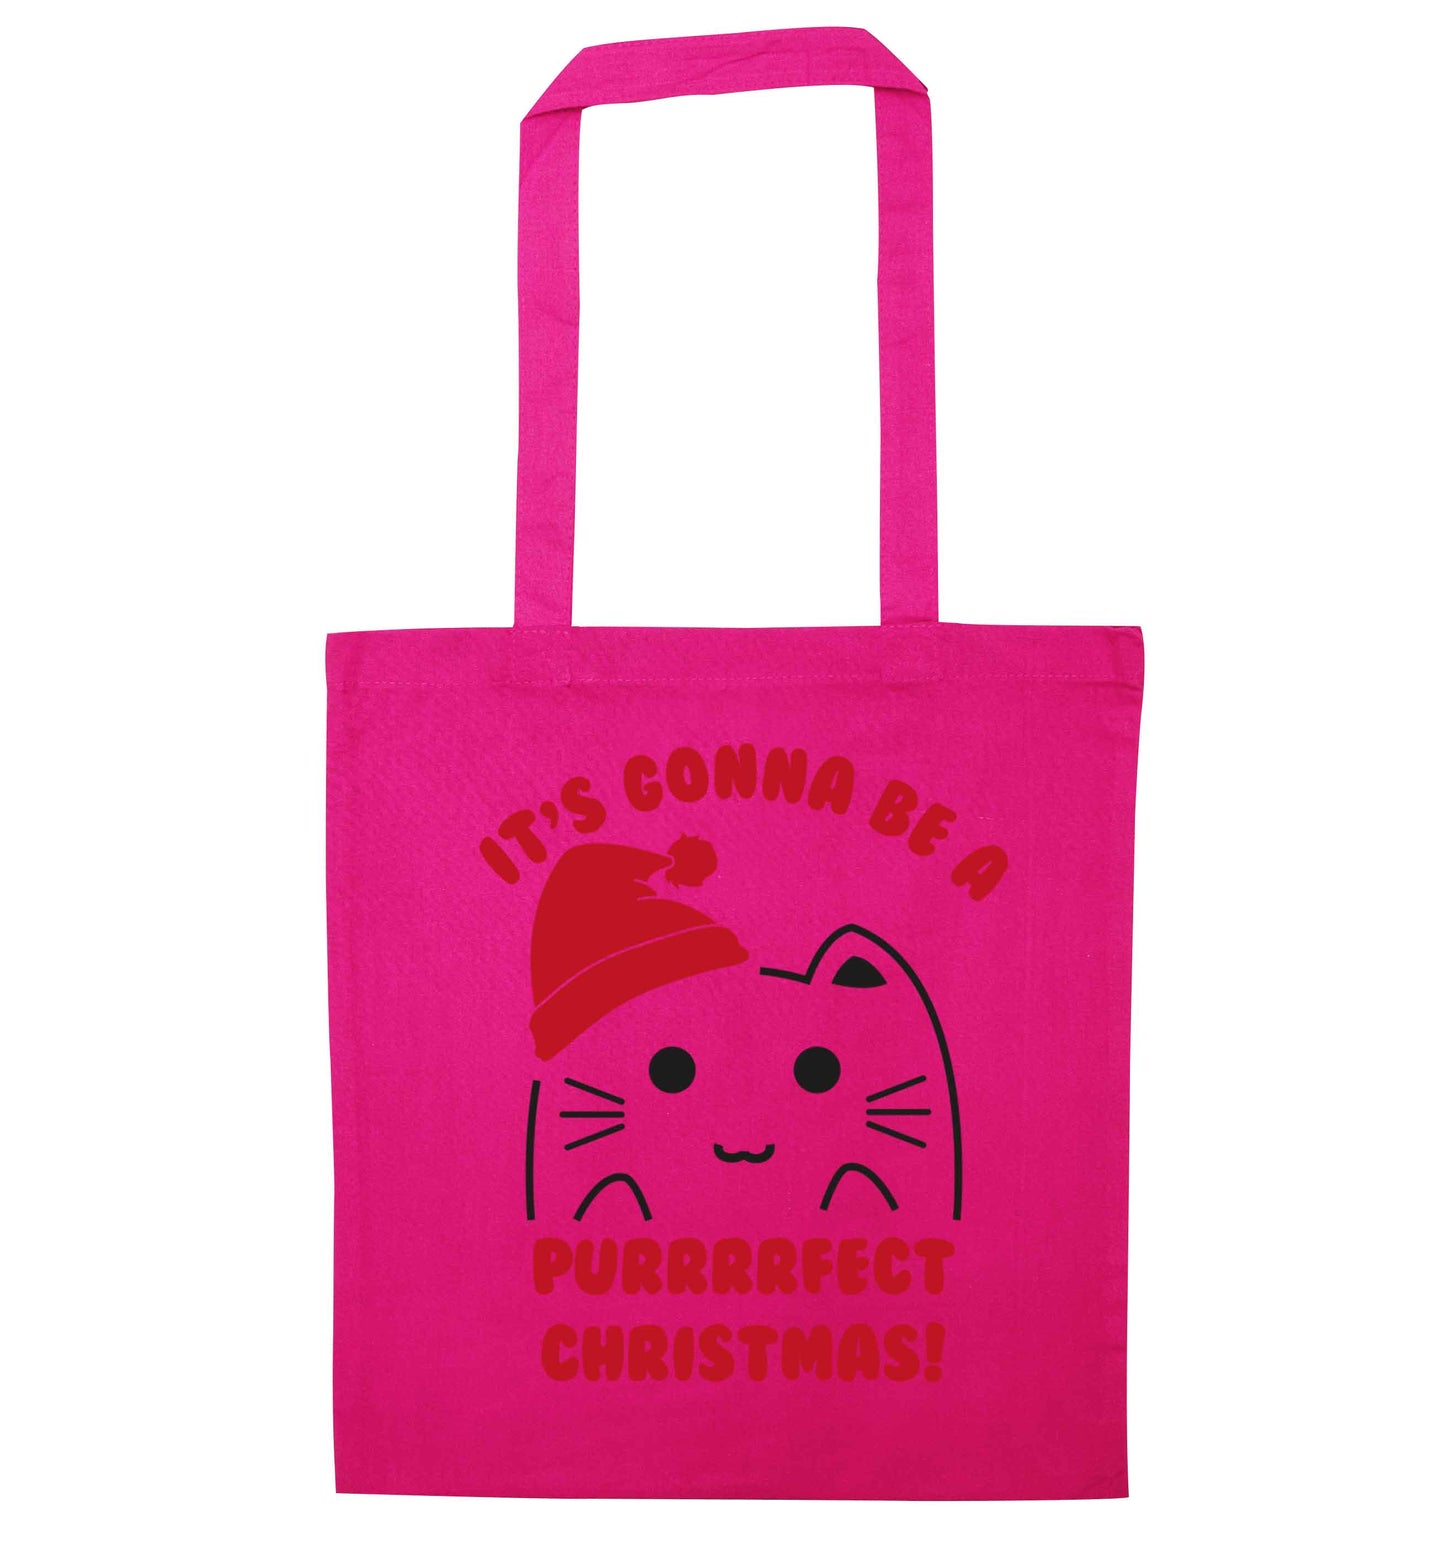 It's going to be a purrfect Christmas pink tote bag